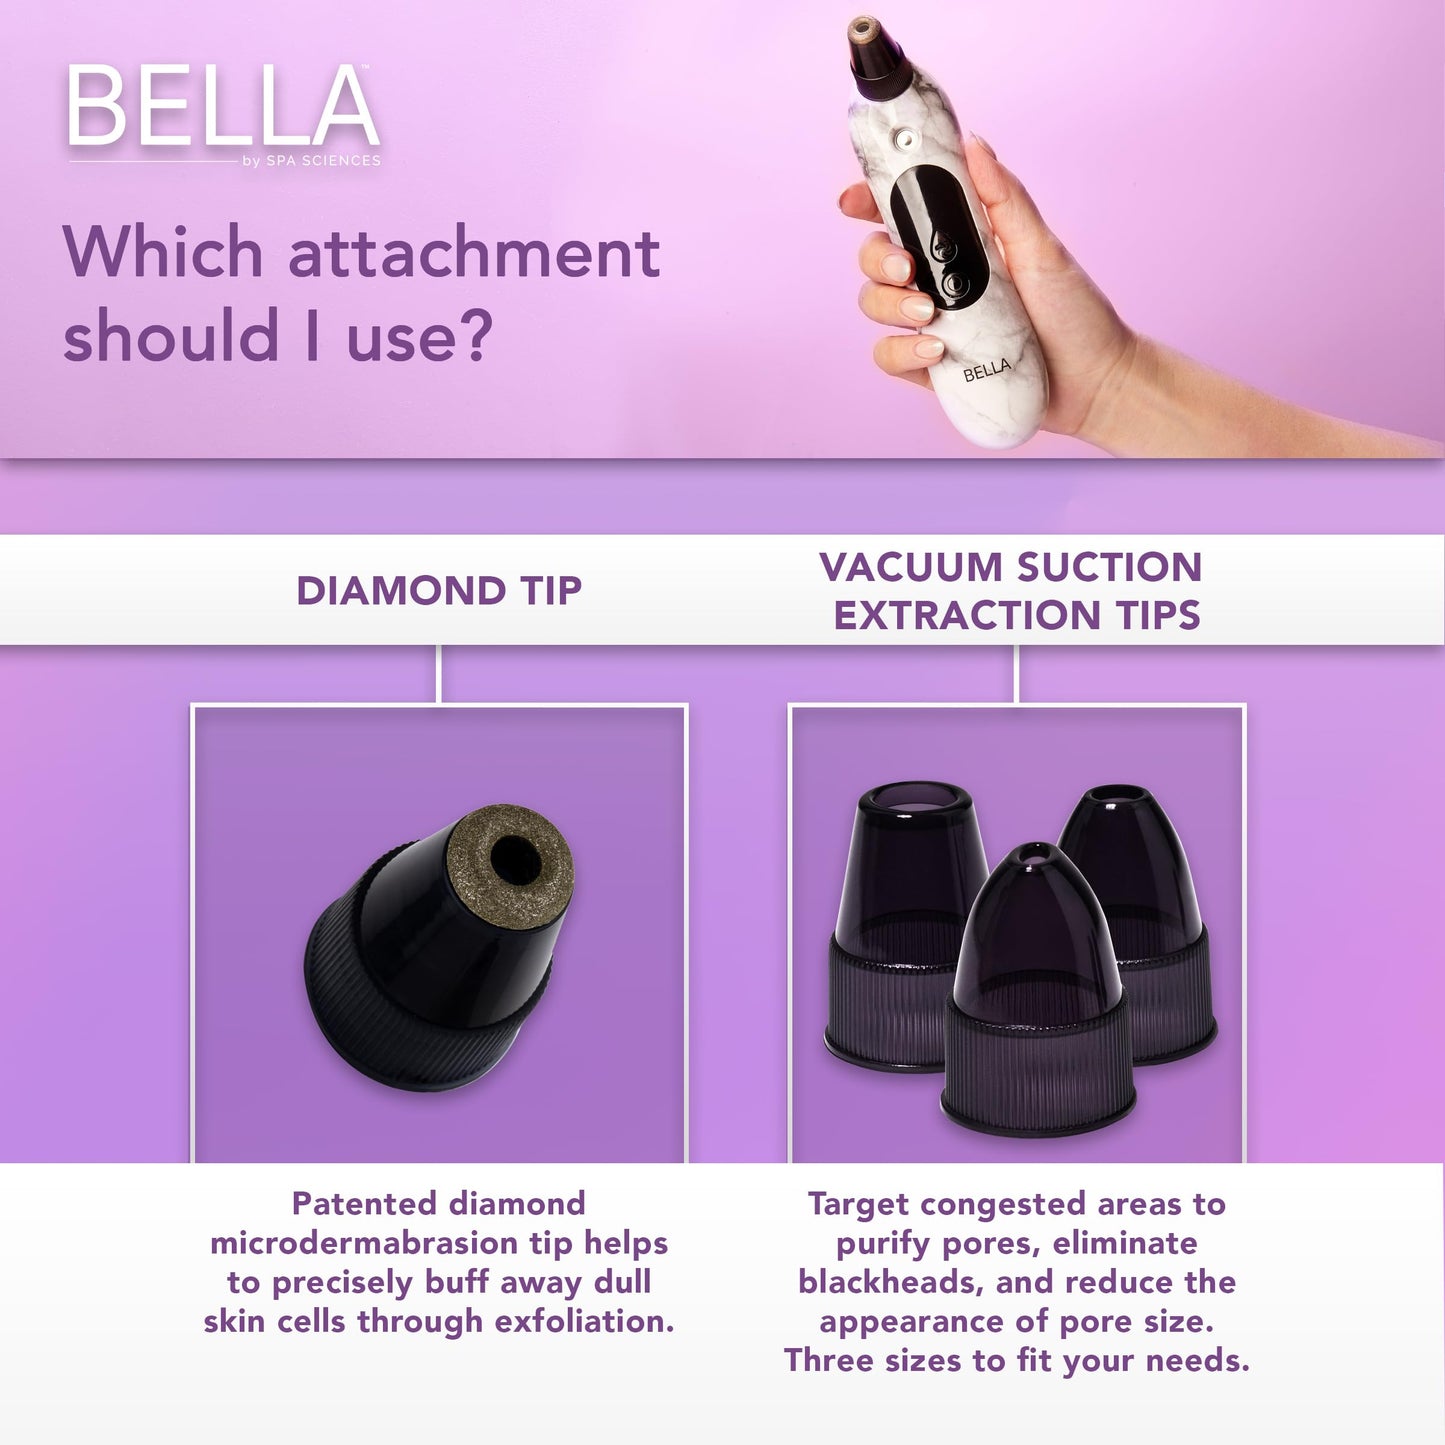 Spa Sciences - Bella Microderm Pore Extractor & Nano Mister - 3-in-1 - Exfoliation & Pore Purification - Hydrating, Refreshing, Soothing - for All Skin Types - USB Charging